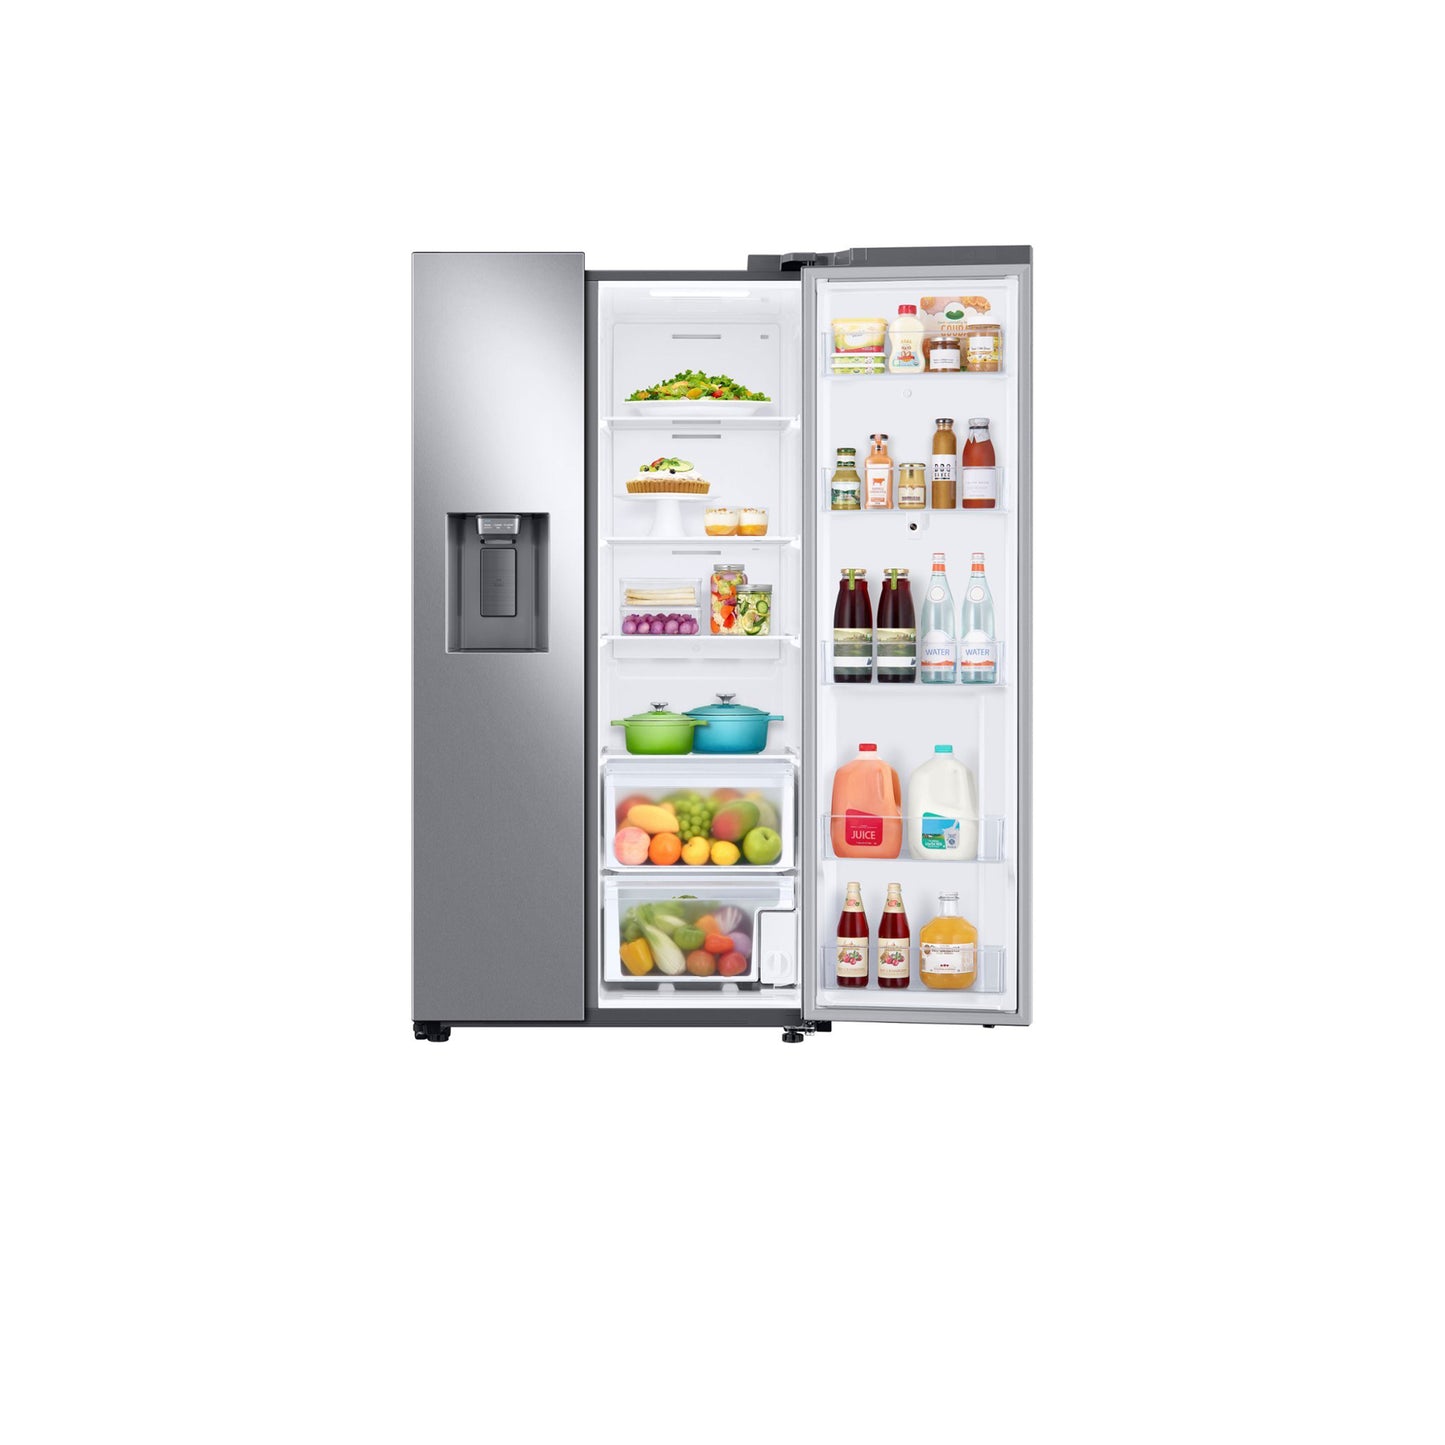 26.7 cu. ft. Large Capacity Side-by-Side Refrigerator with Touch Screen Family Hub™ in Stainless Steel.